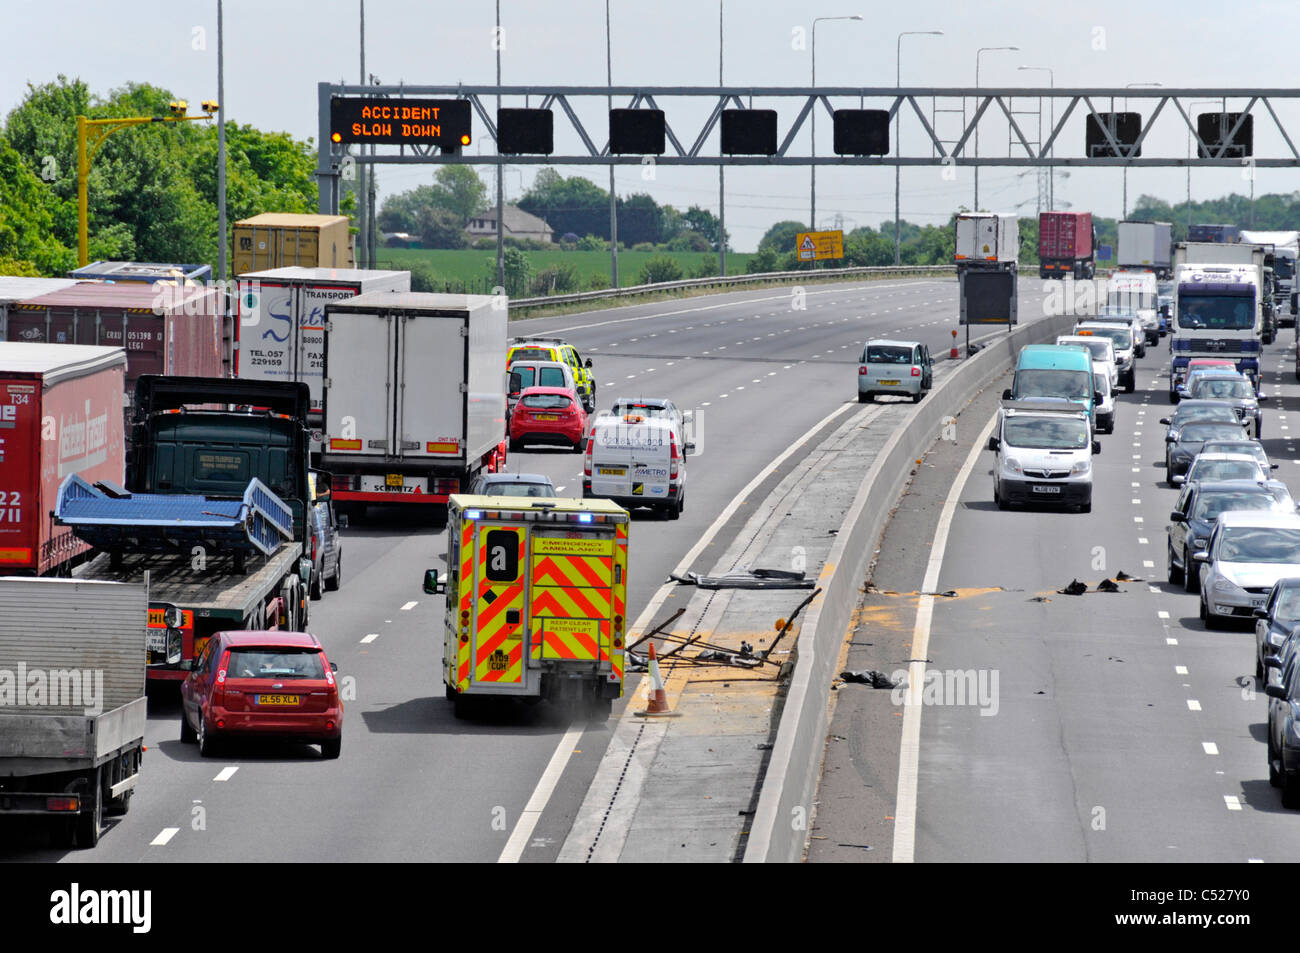 M25 motorway delays in both directions after crashes in each carriageway ambulance avoiding debris to reach accident M25 motorway Essex England UK Stock Photo